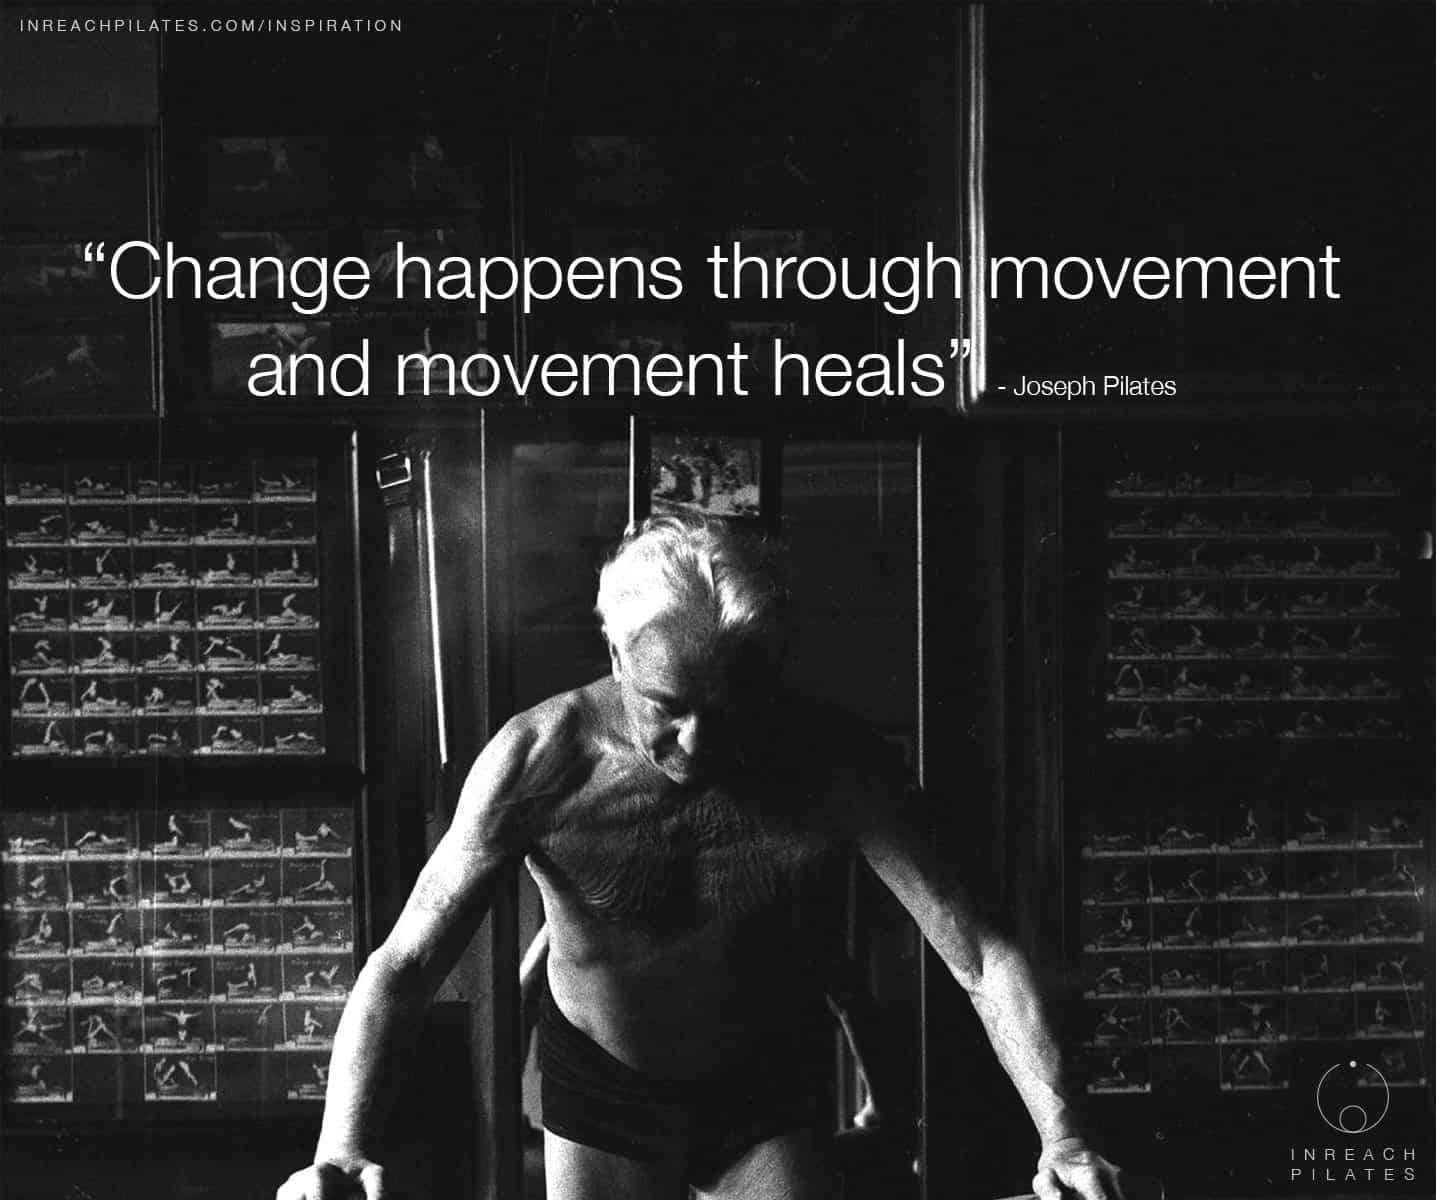 Read this before you share another Joseph Pilates quote Hey, no